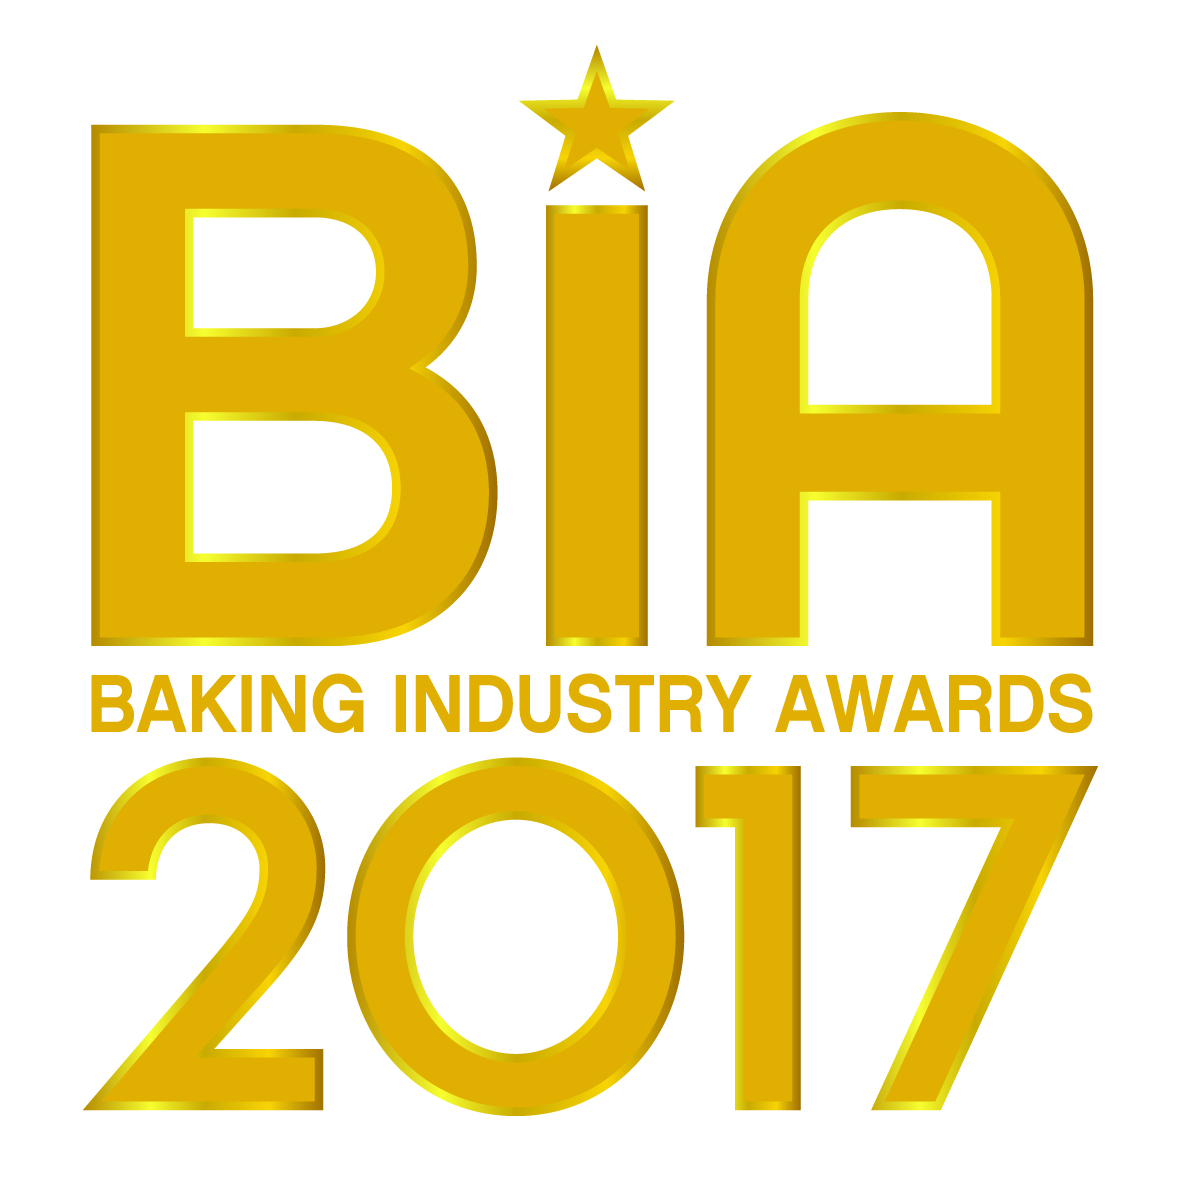 Enter the Baking Industry Awards 2017